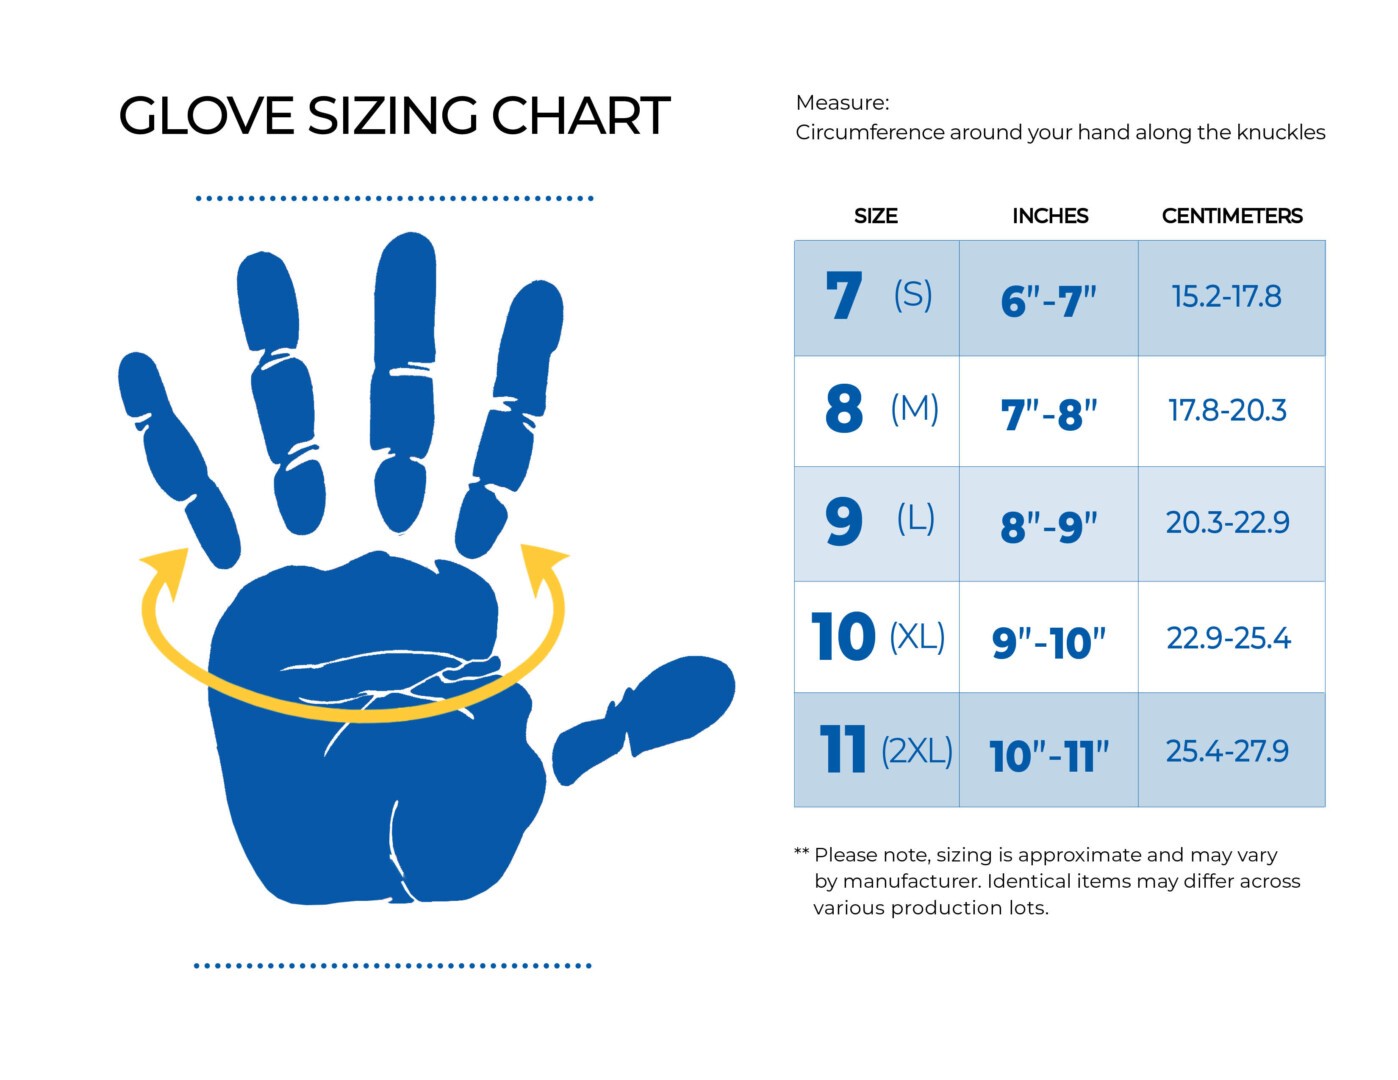 A glove sizing chart that features a blue outline of a hand on the left side with a yellow arrow indicating circumference. On the right side, a series of numbers connect inches to glove sizes.